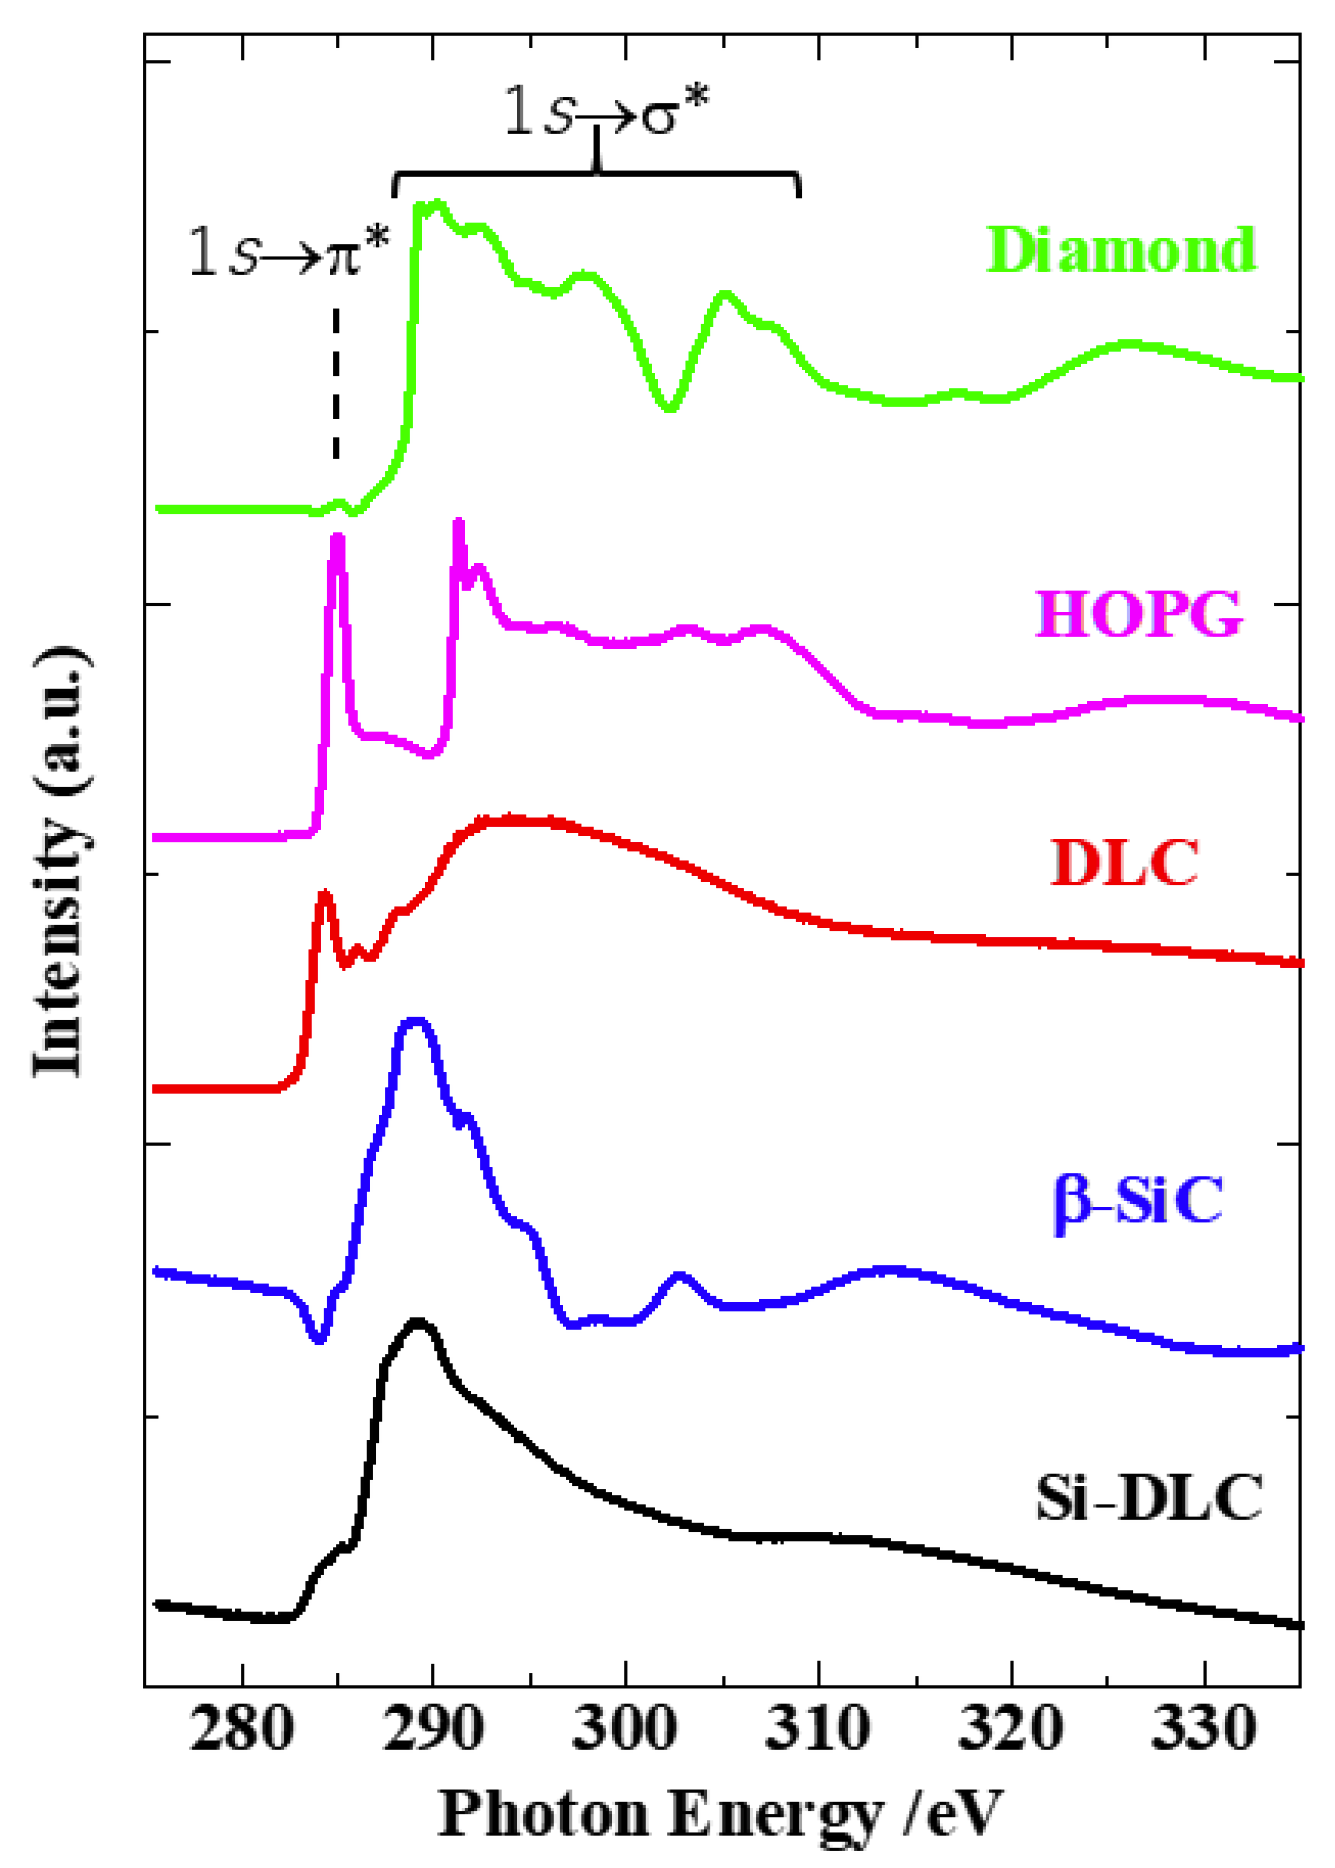 Coatings Free Full Text Local Structure Analysis On Si Containing Dlc Films Based On The Measurement Of C K Edge And Si K Edge X Ray Absorption Spectra Html